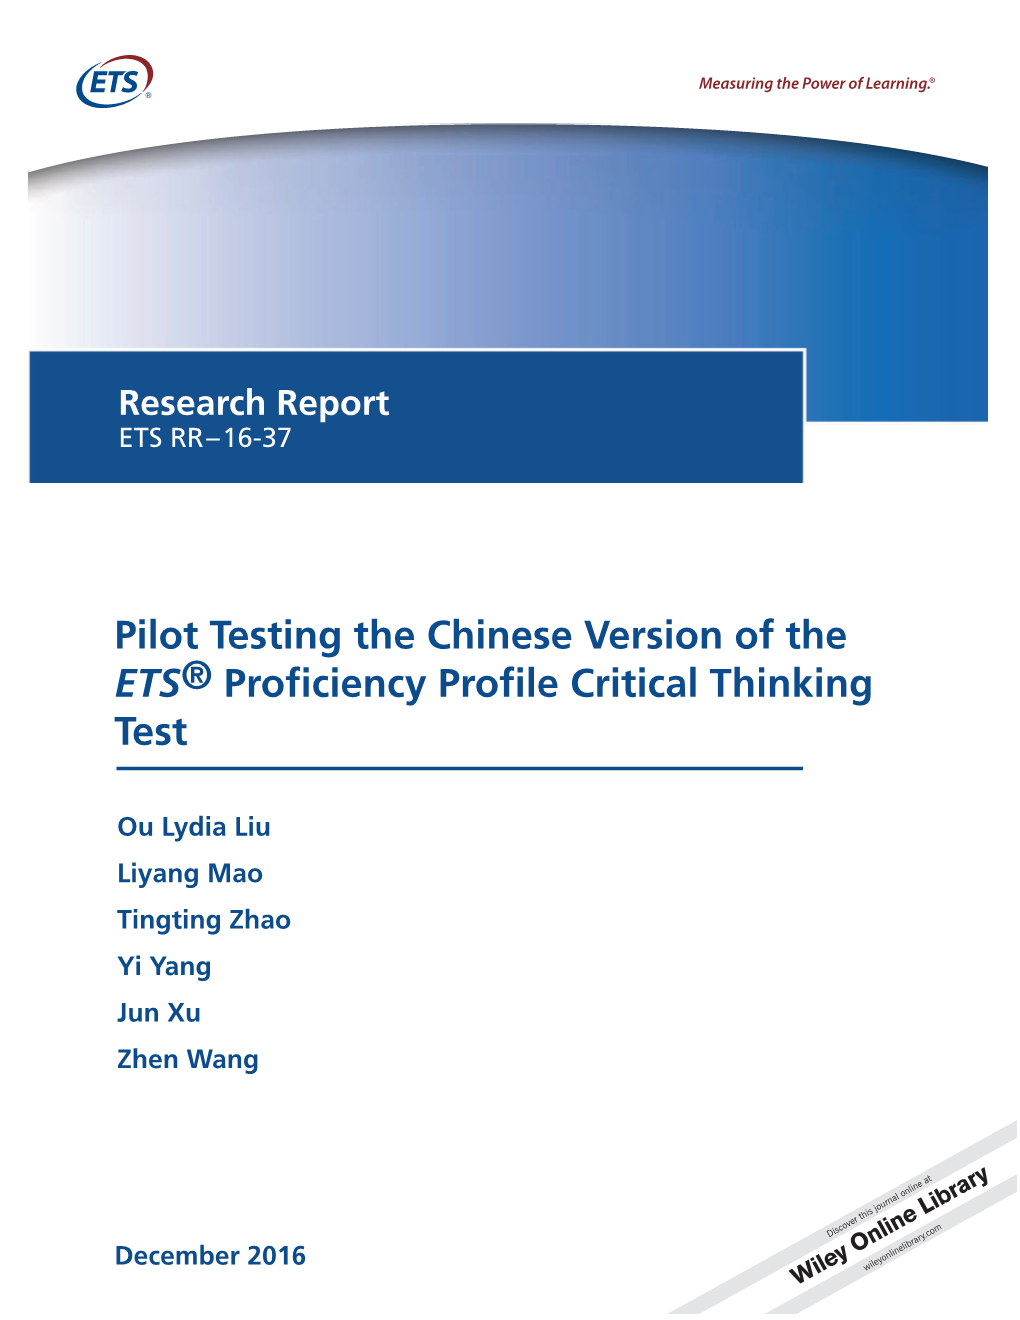 Pilot Testing the Chinese Version of the ETS® Proficiency Profile Critical Thinking Test